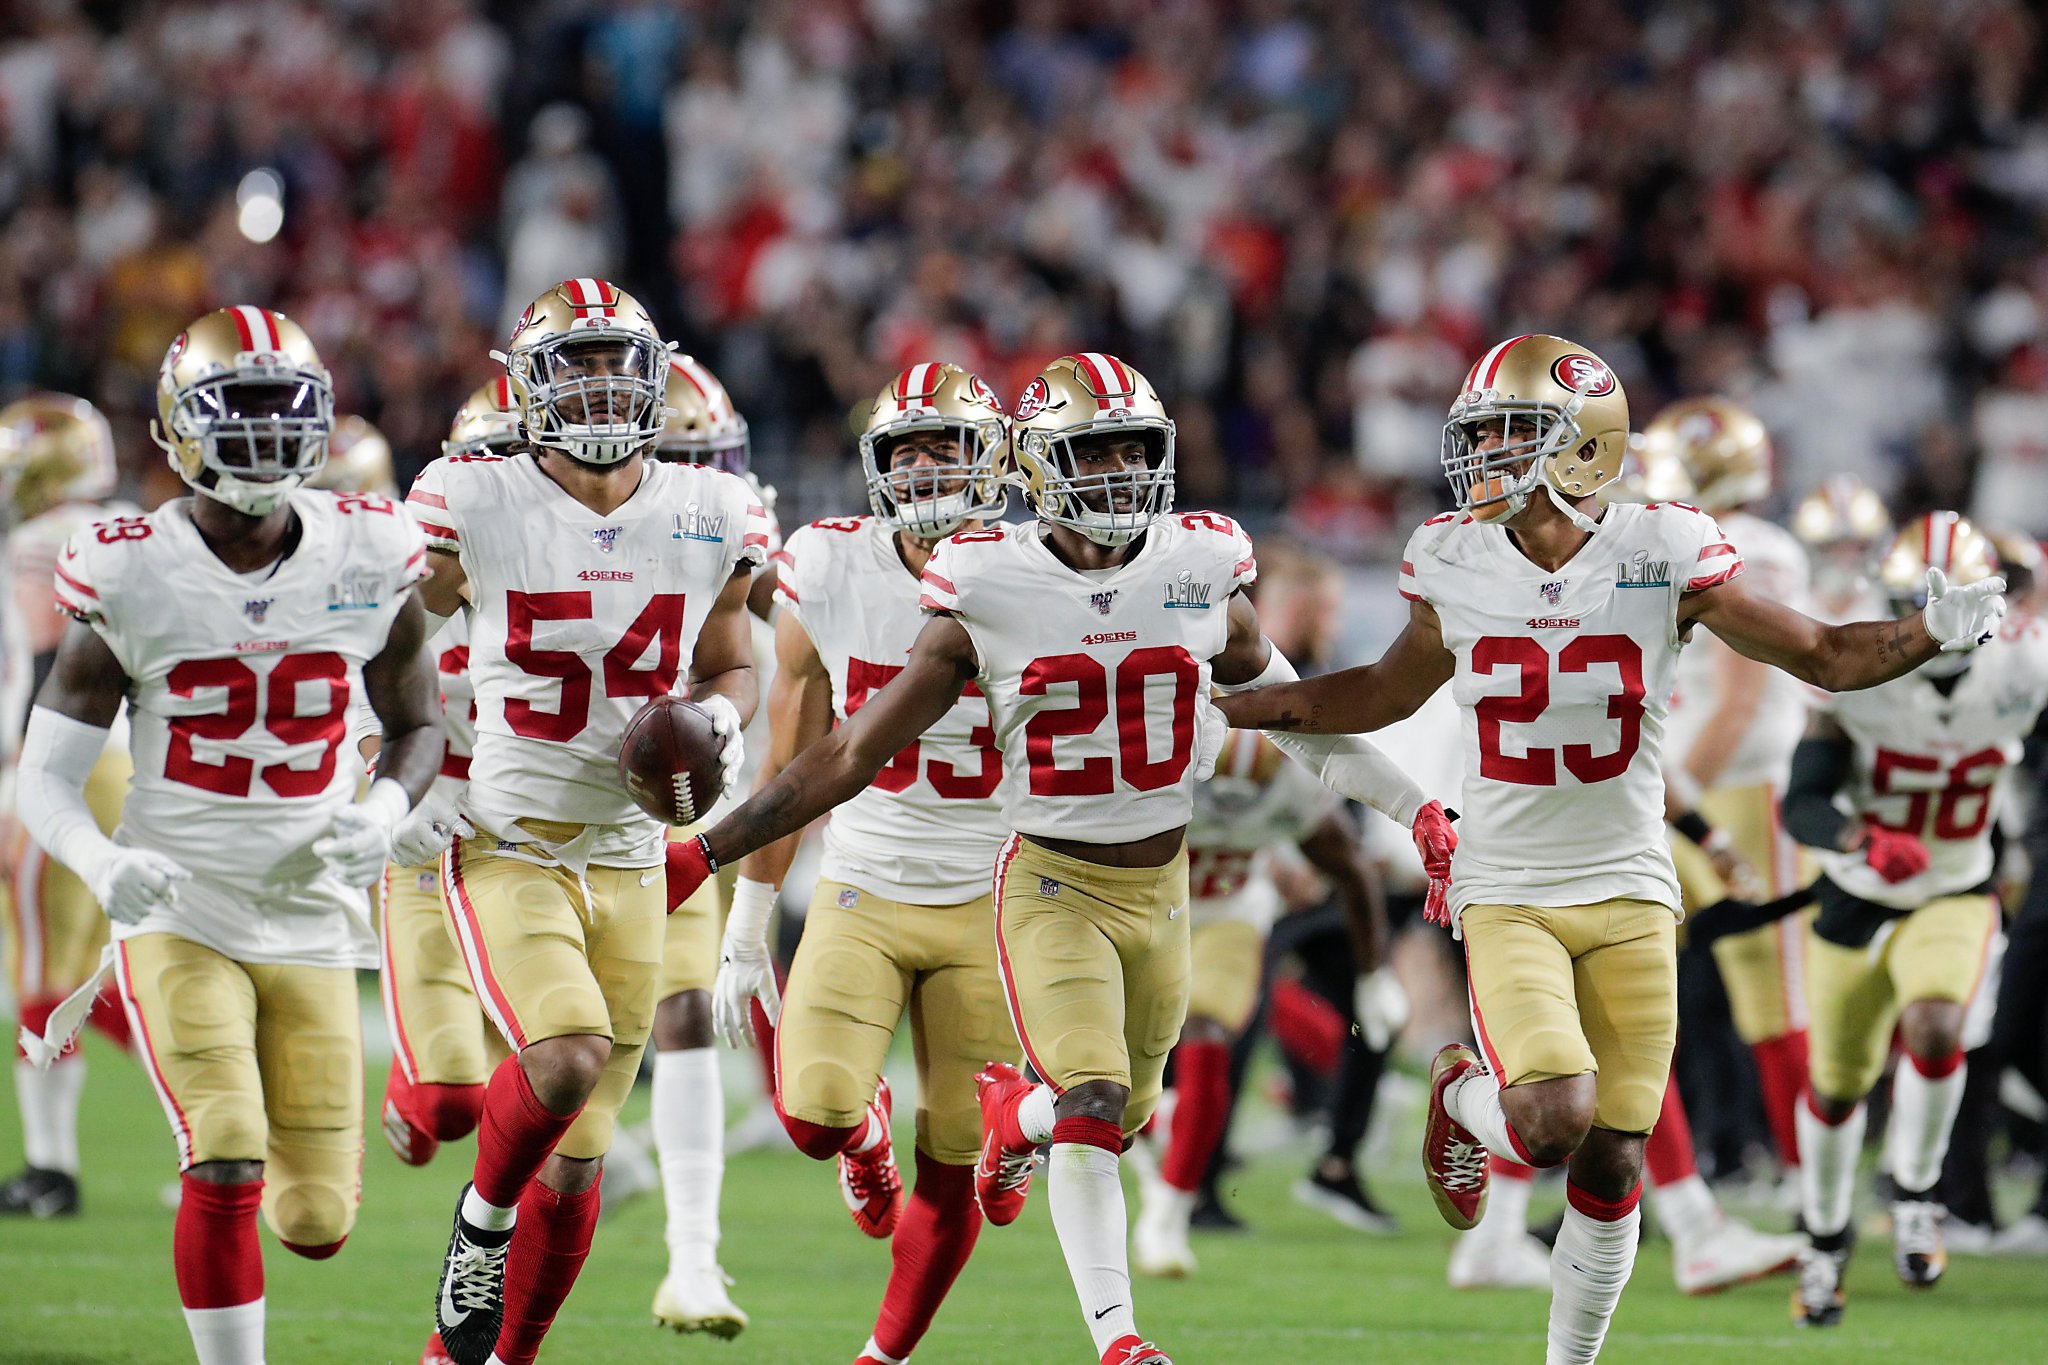 Future looks bright': Bay Area Twitter reacts to 49ers' Super Bowl